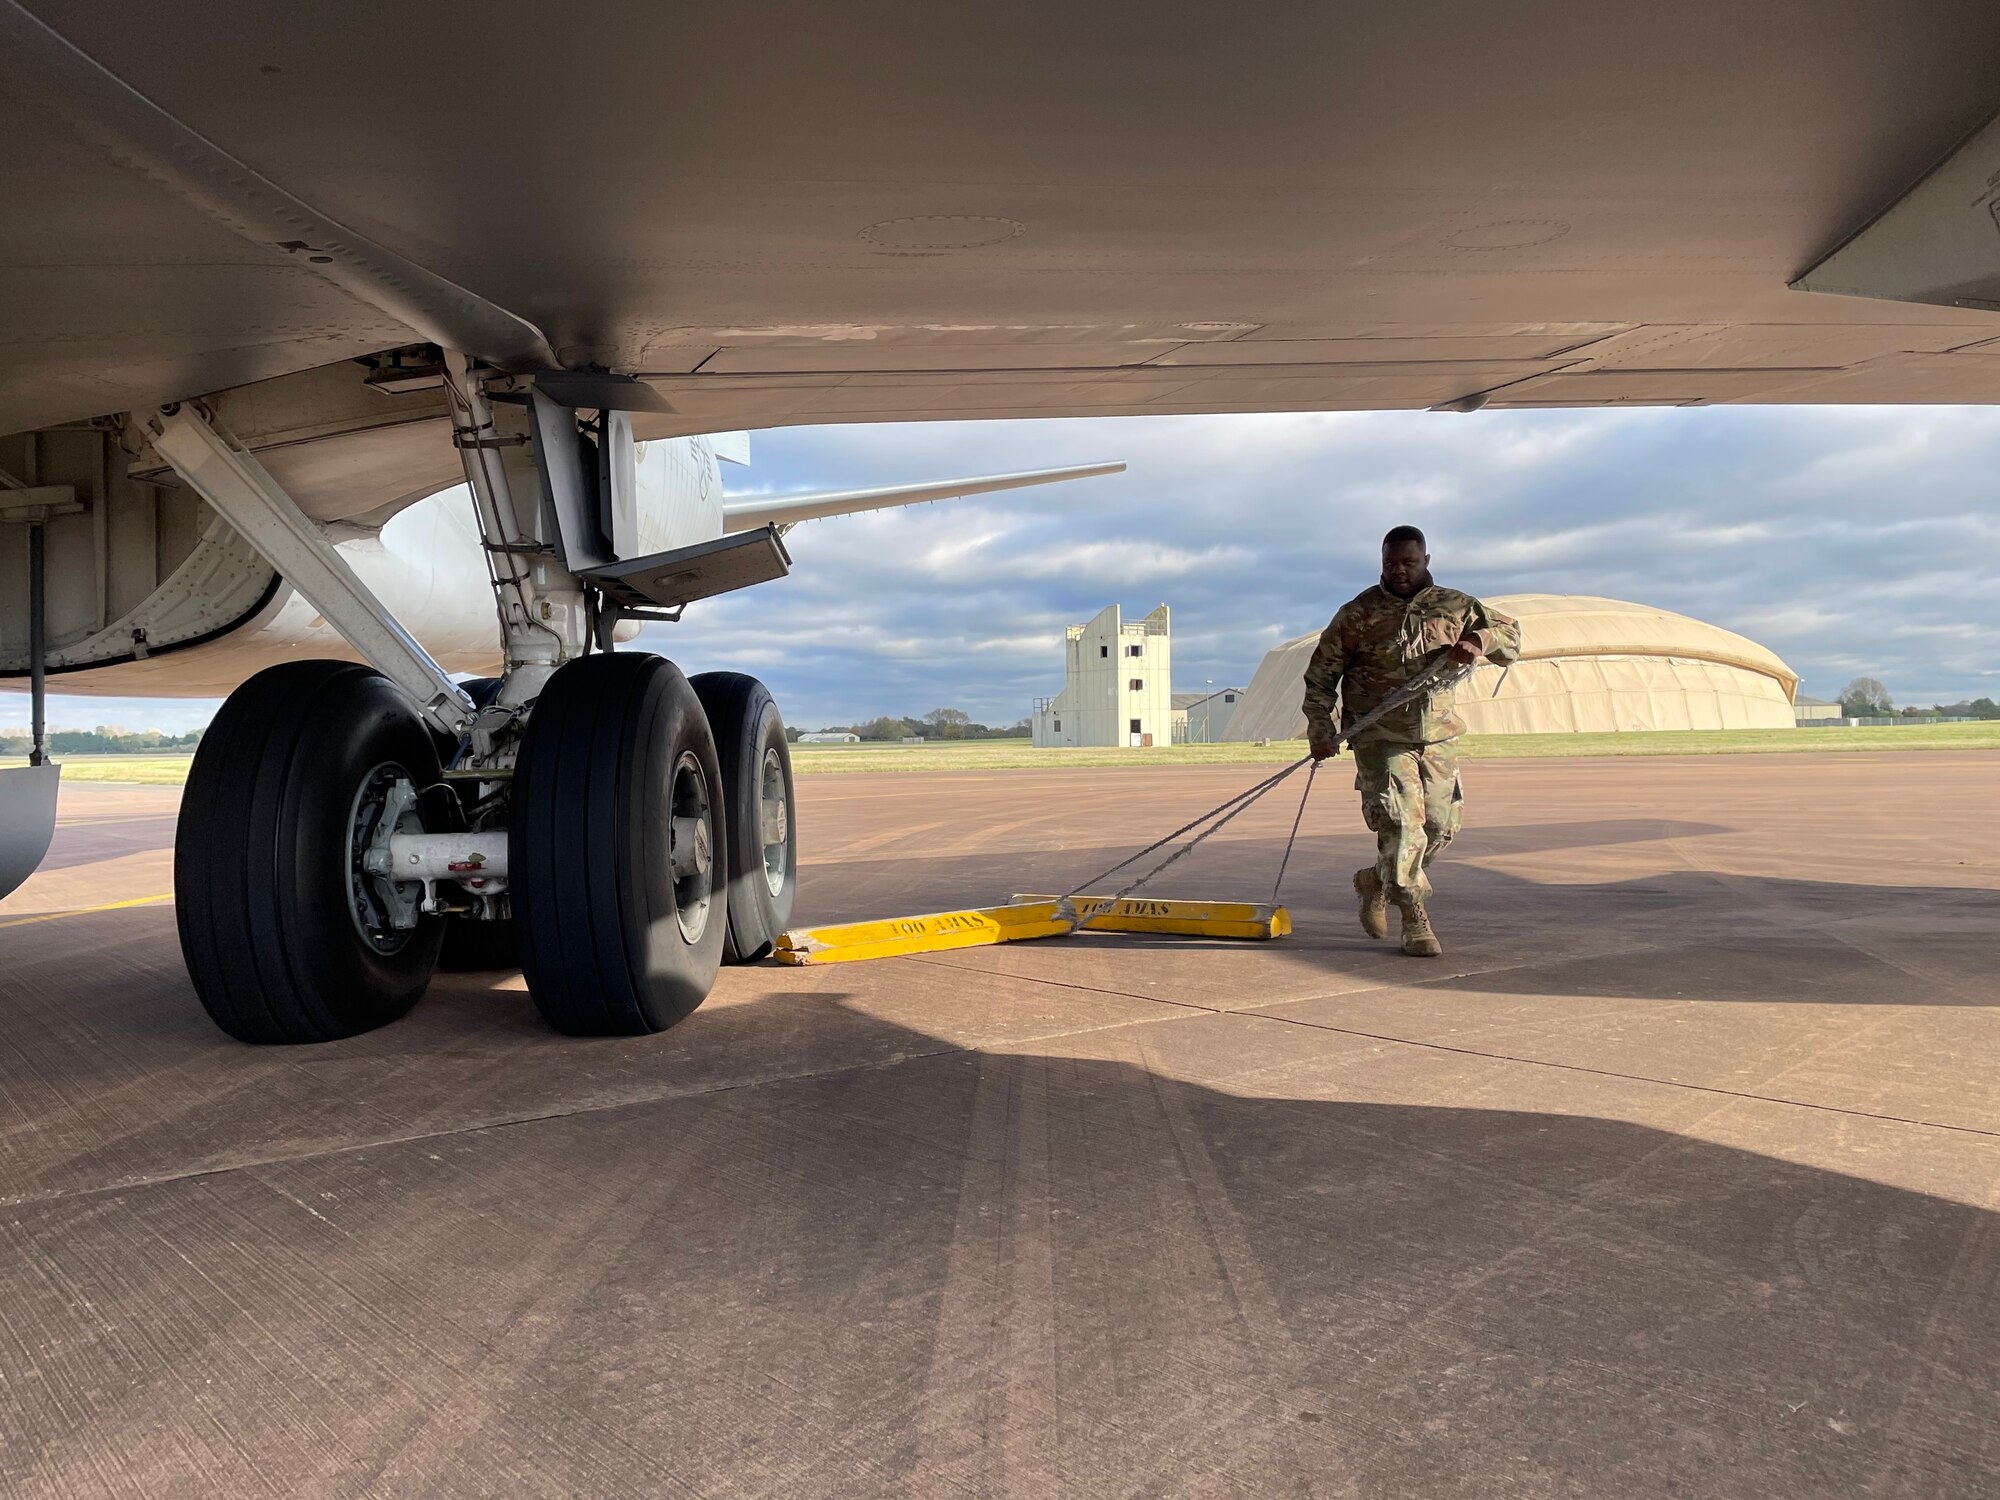 U.S. Air Force Senior Airman Santonio Portis, 100th Aircraft Maintenance Squadron electrical and environmental journeyman, removes aircraft wheel chocks from a KC-135 Stratotanker aircraft prior to flight during exercise Castle Forge at Royal Air Force Fairford, England, Nov. 3, 2021. Exercising elements of Agile Combat Employment enables U.S. forces in Europe to operate from locations with varying levels of capacity and support, ensuring Airmen and aircrews are postured to deliver lethal combat power across the spectrum of military operations. In addition to F-15 Eagle aircraft operations in the Black Sea Region, Castle Forge encompasses the USAFE-wide ACE capstone event. Castle Forge’s components will better enable forces to quickly disperse and continue to deliver air power from locations with varying levels of capacity and support, ensuring Airmen are always ready to respond to potential threats. (U.S. Air Force photo by Senior Airman Joseph Barron)